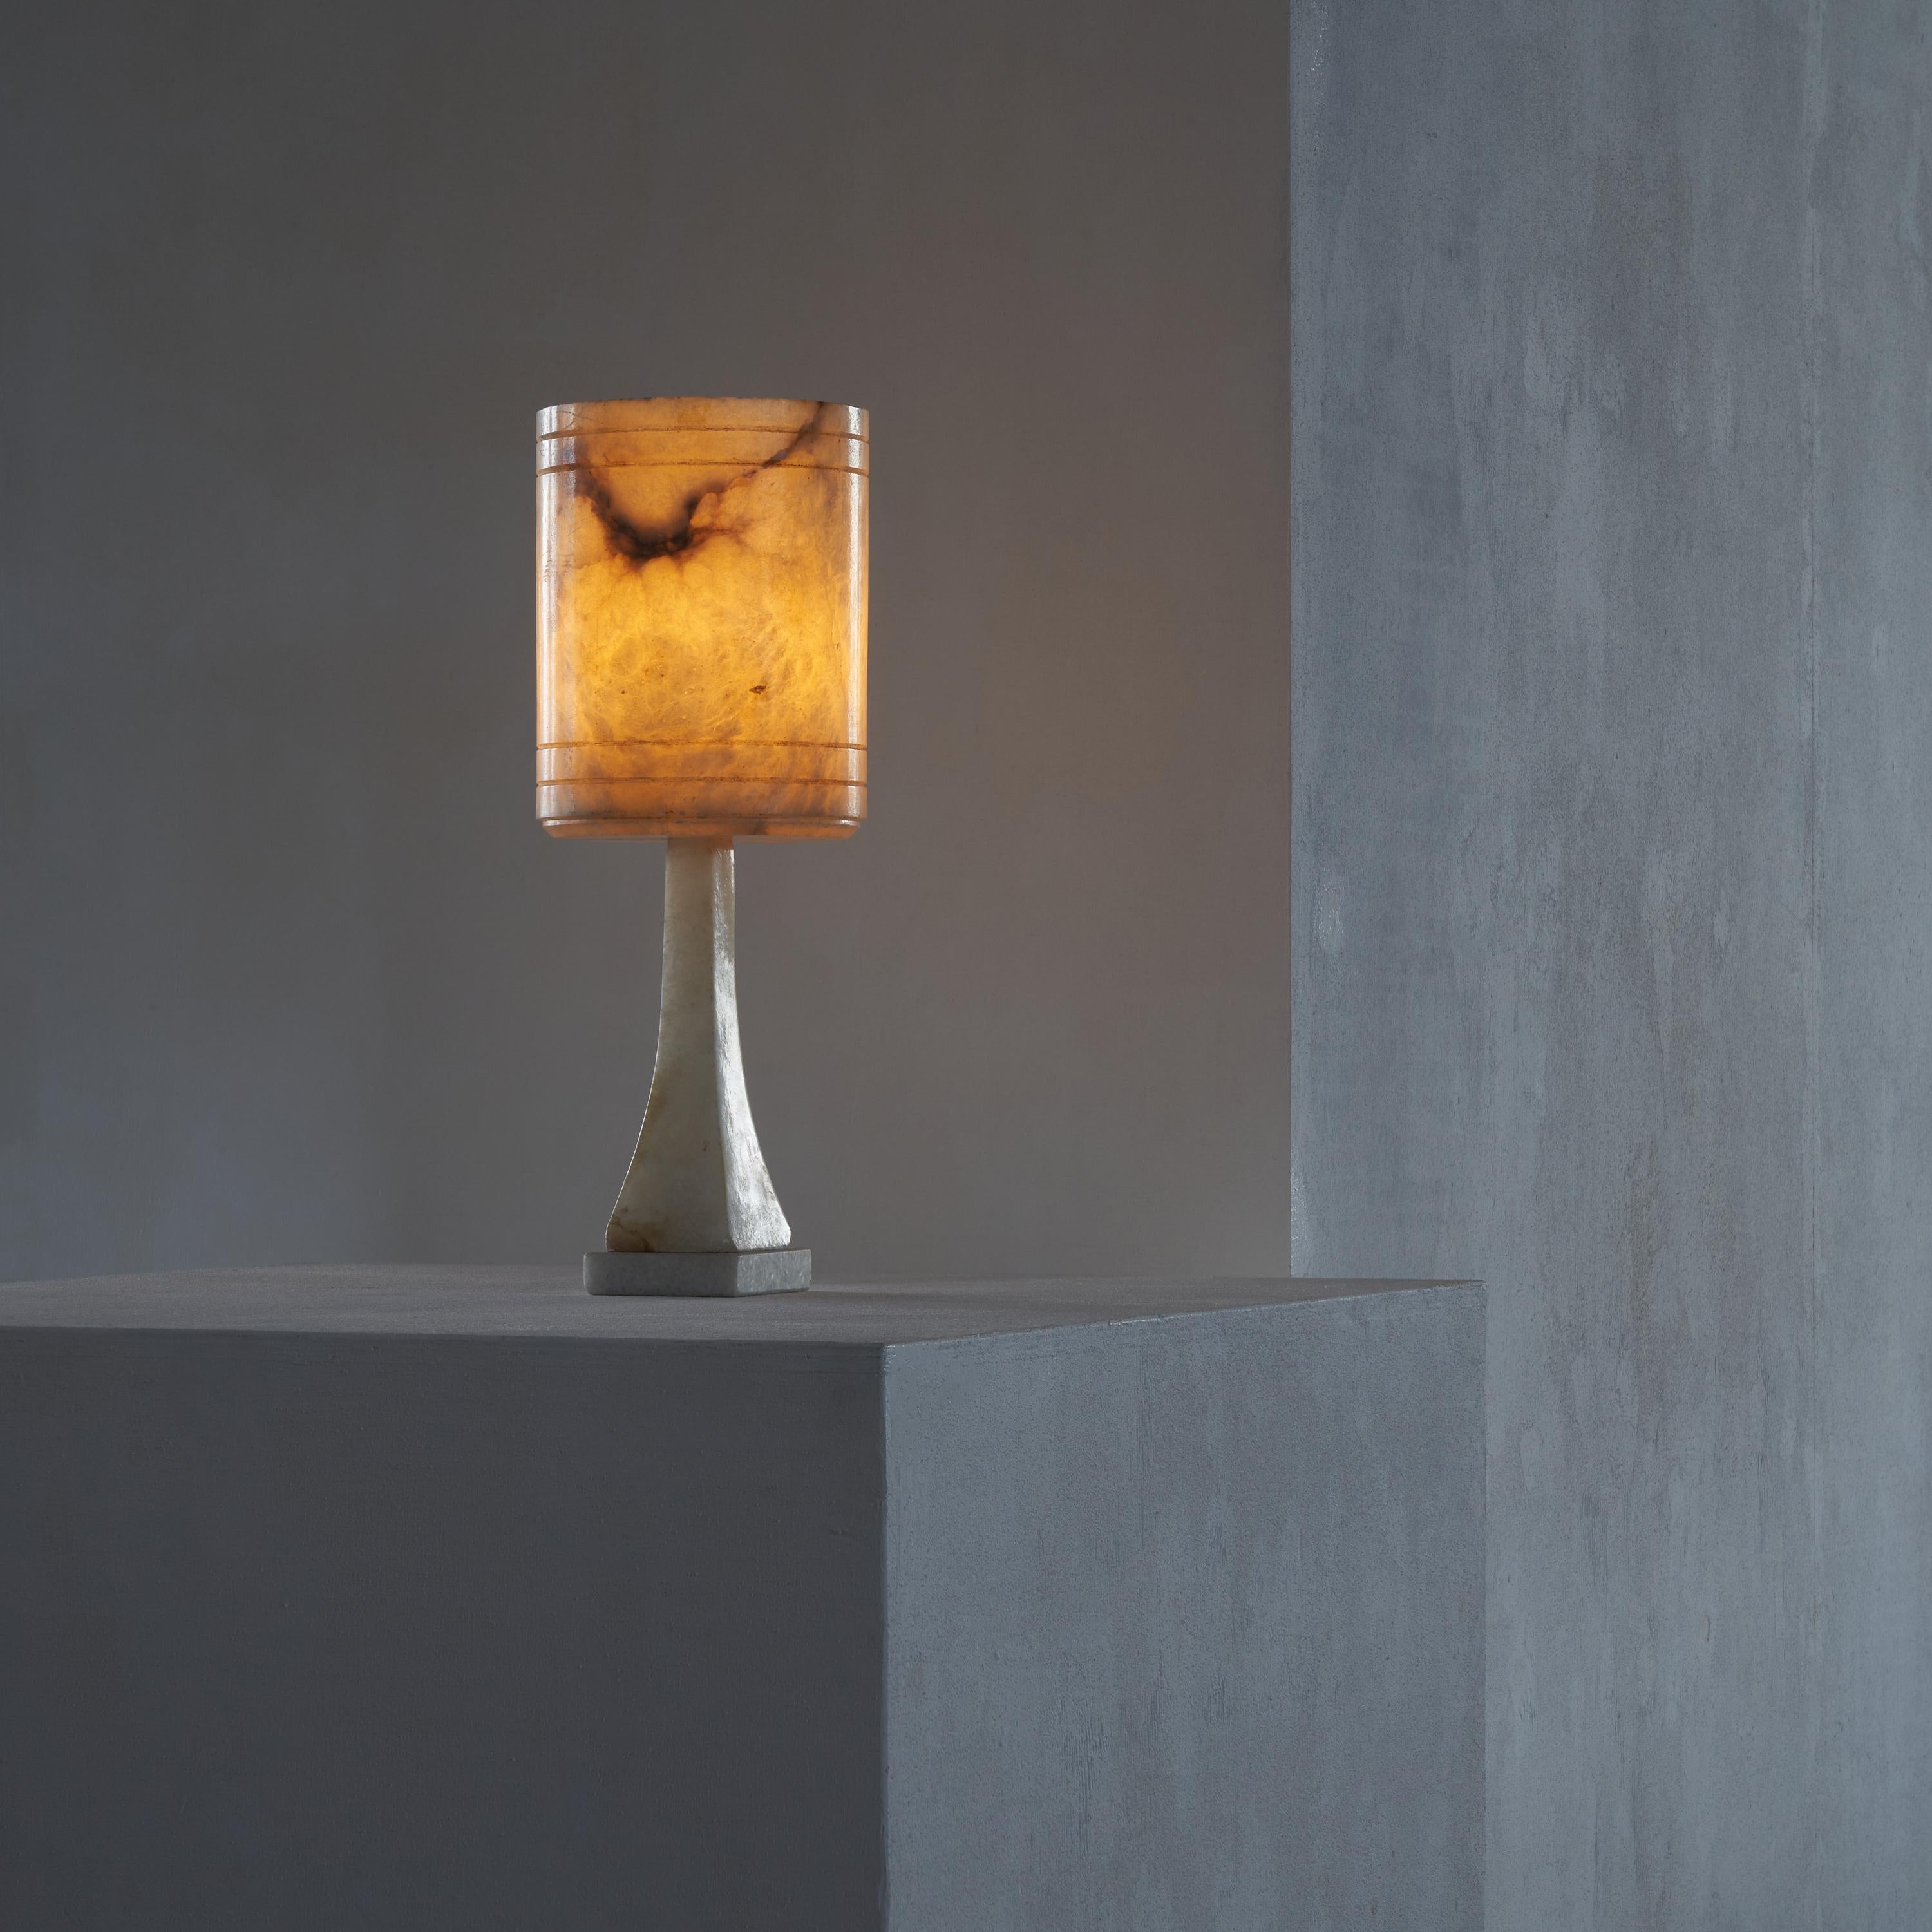 Mid Century Table Lamp in Alabaster 1960s or 1970s.

This is a wonderful and large table lamp in alabaster, made in the 1960s or 1970s in Europe, Spain or Italy. A high quality piece with an elegant and timeless design. It consists out of two parts,